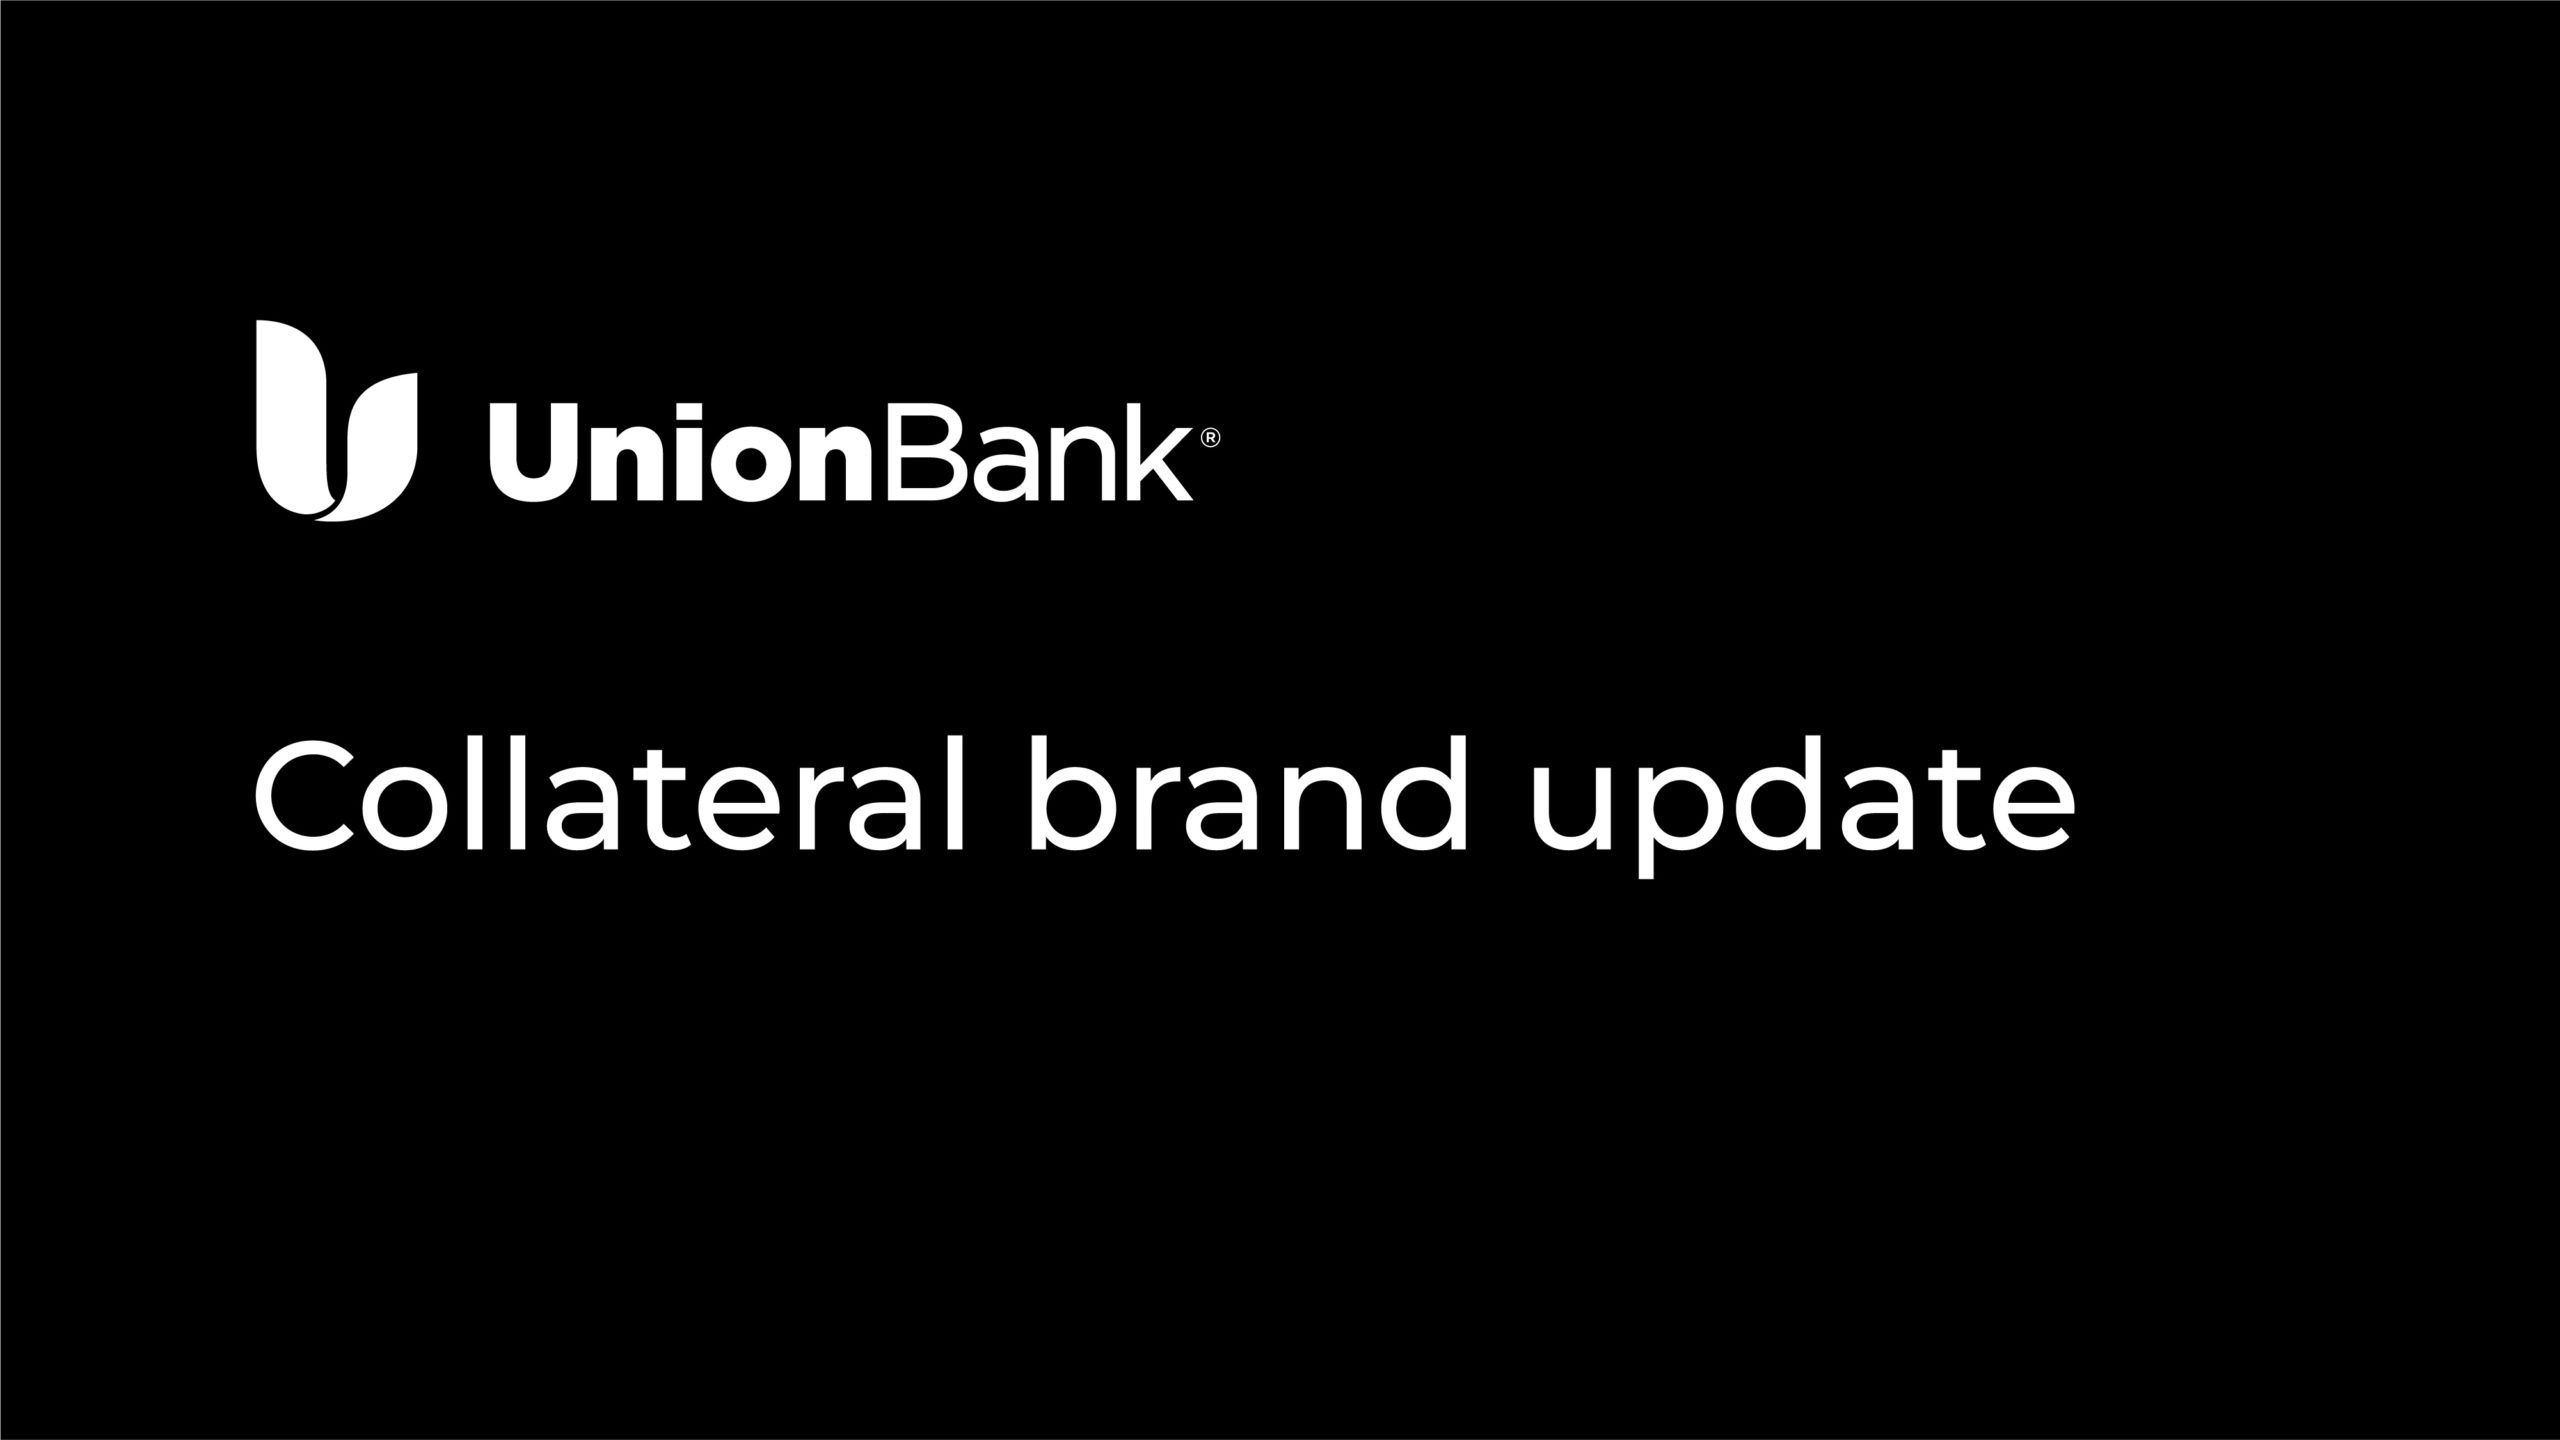 Union bank collateral brand update